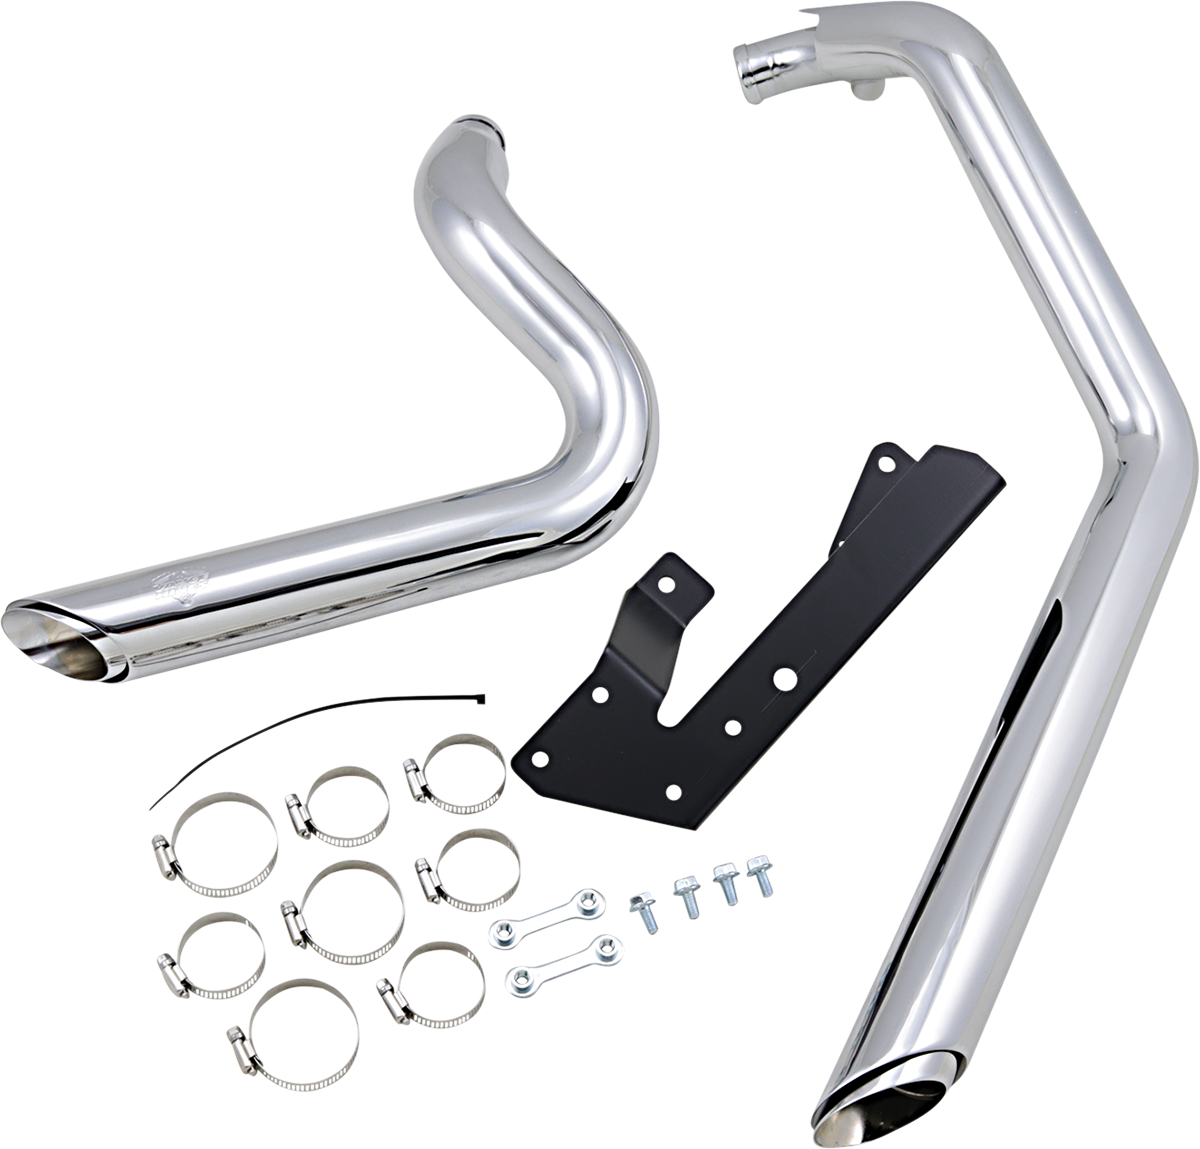 VANCE & HINES Shortshots Staggered Exhaust System - Chrome 17219